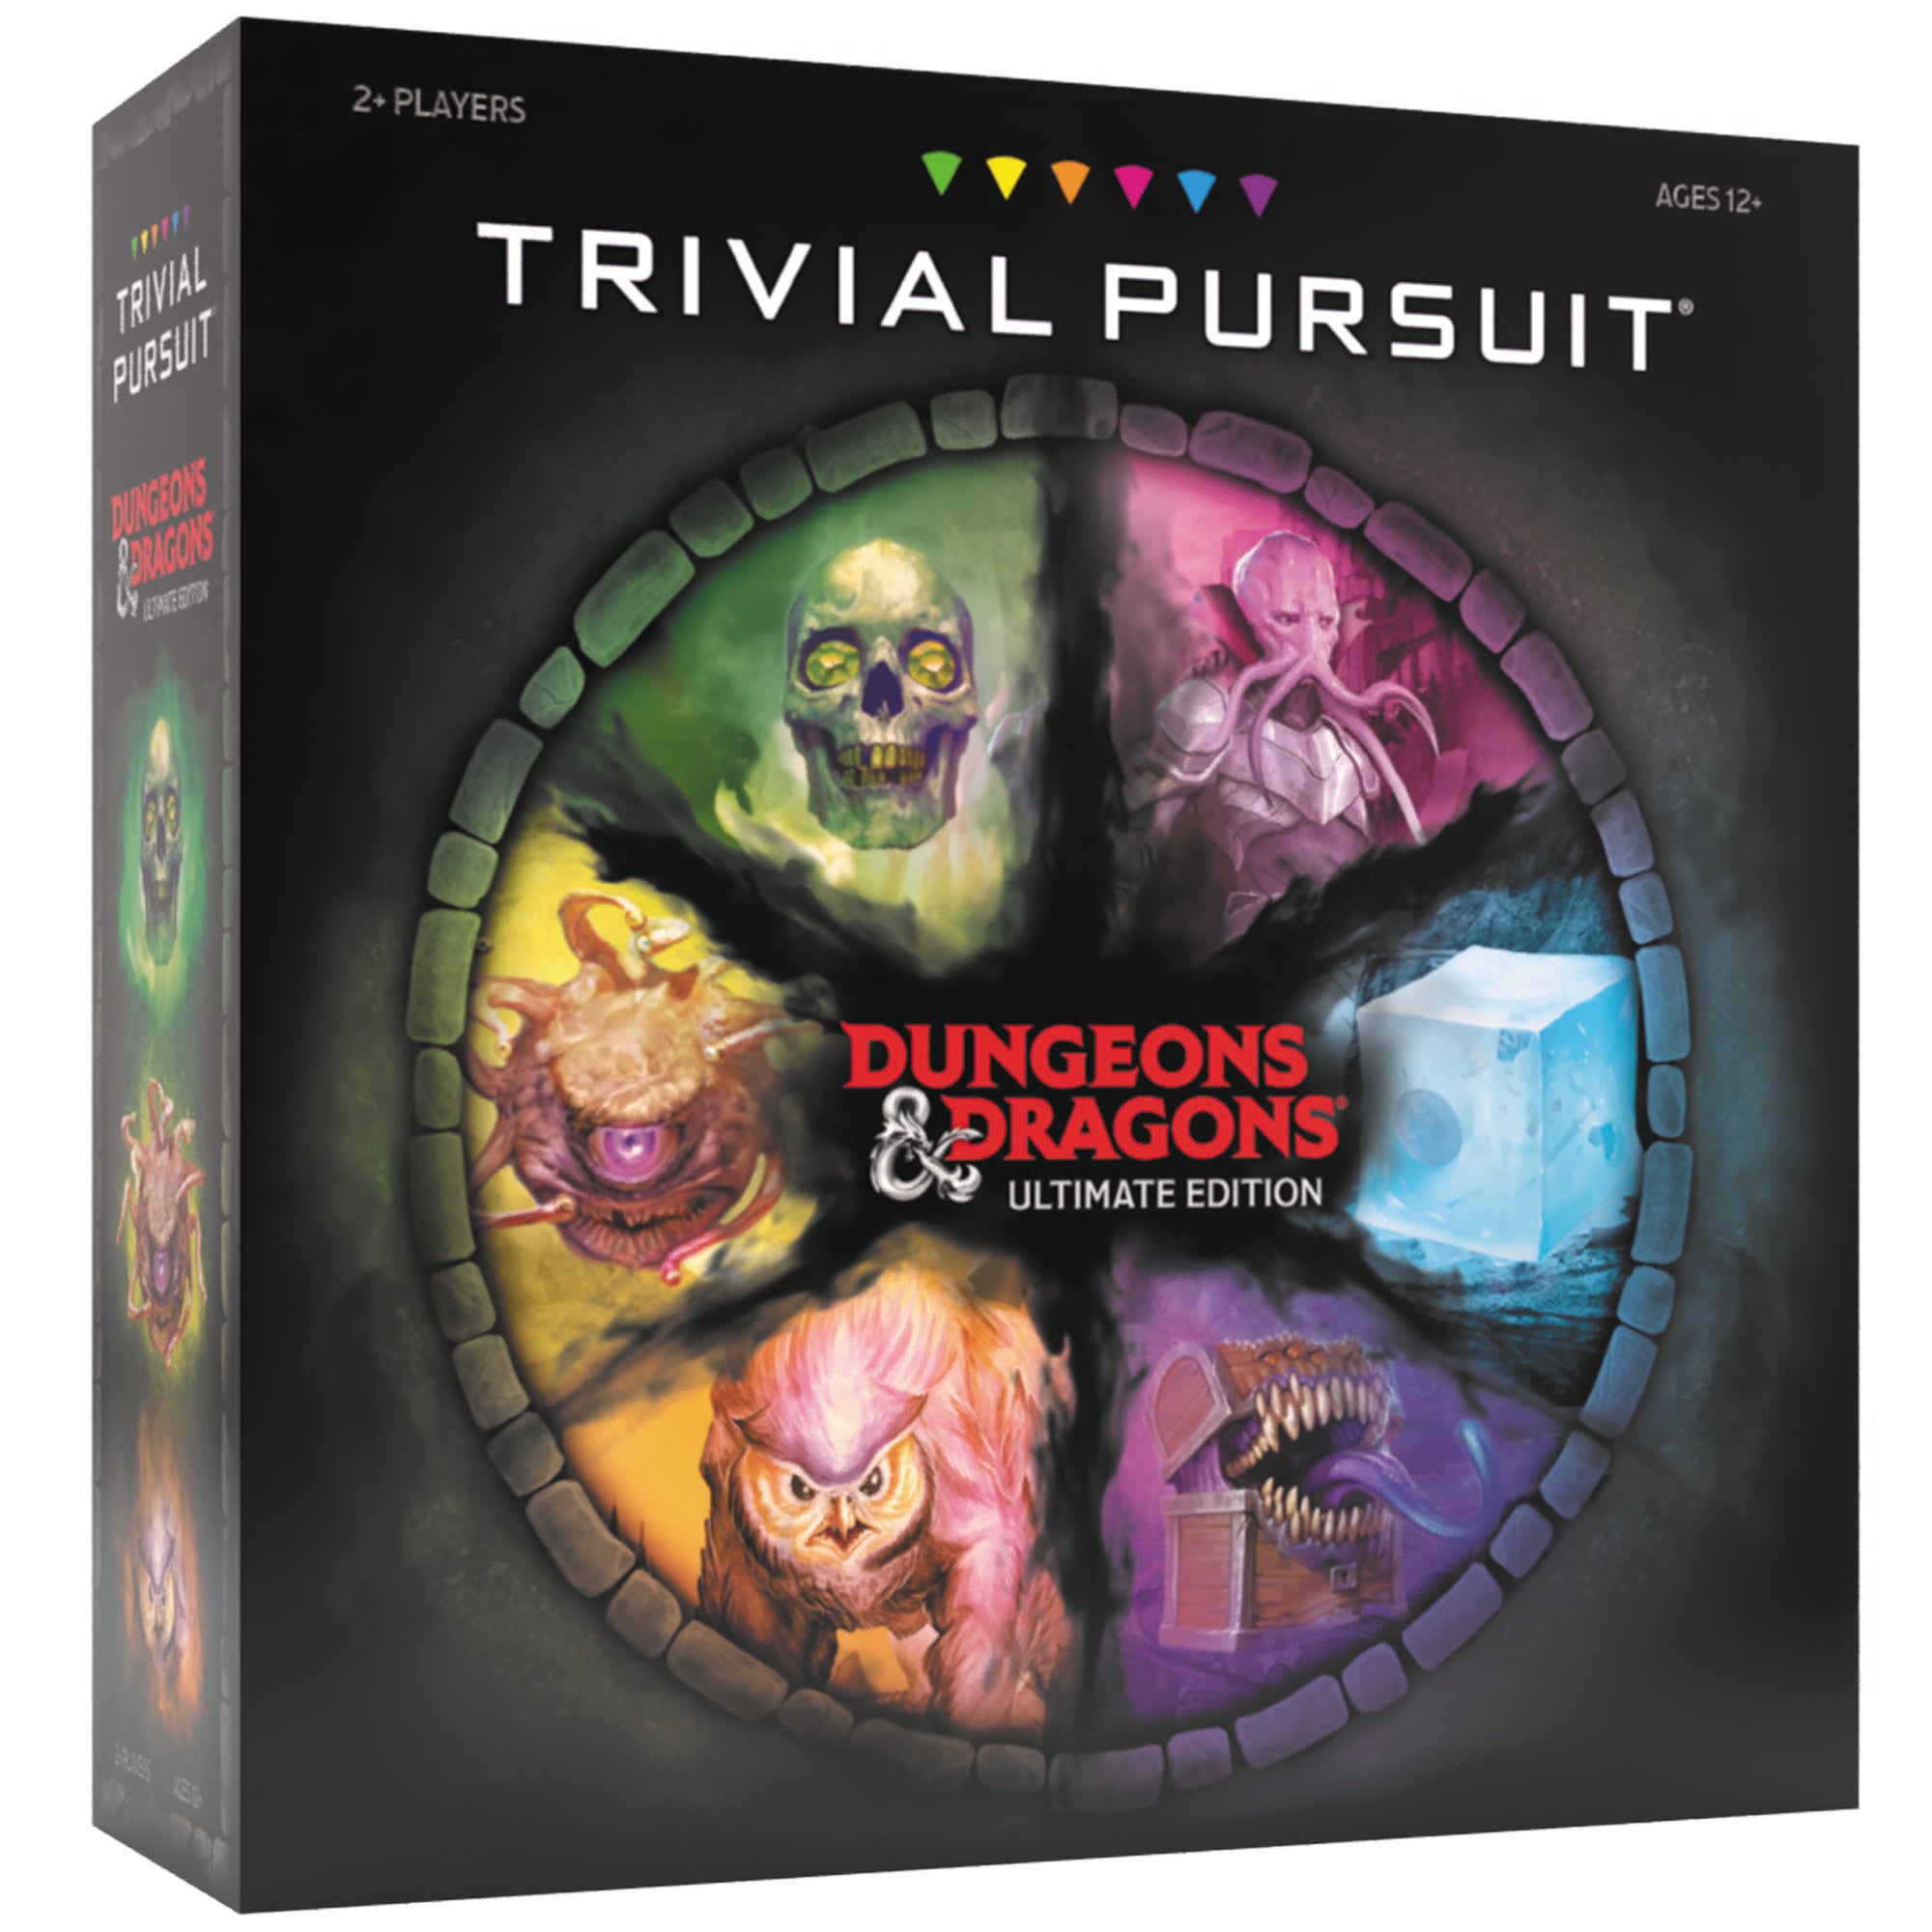 Colapso bosquejo digerir TRIVIAL PURSUIT®: Dungeons & Dragons Ultimate Edition – The Op Games